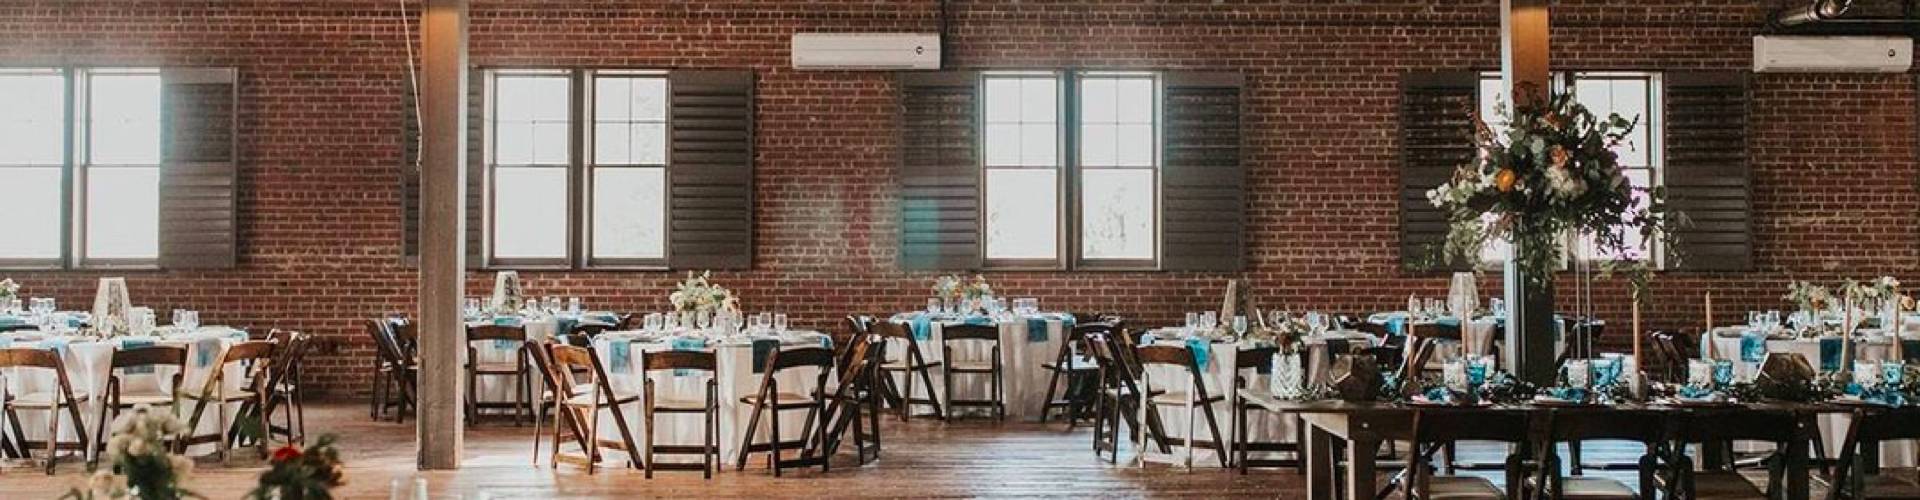 Rehearsal Dinner decorations at The Chair Factory industrial wedding venue